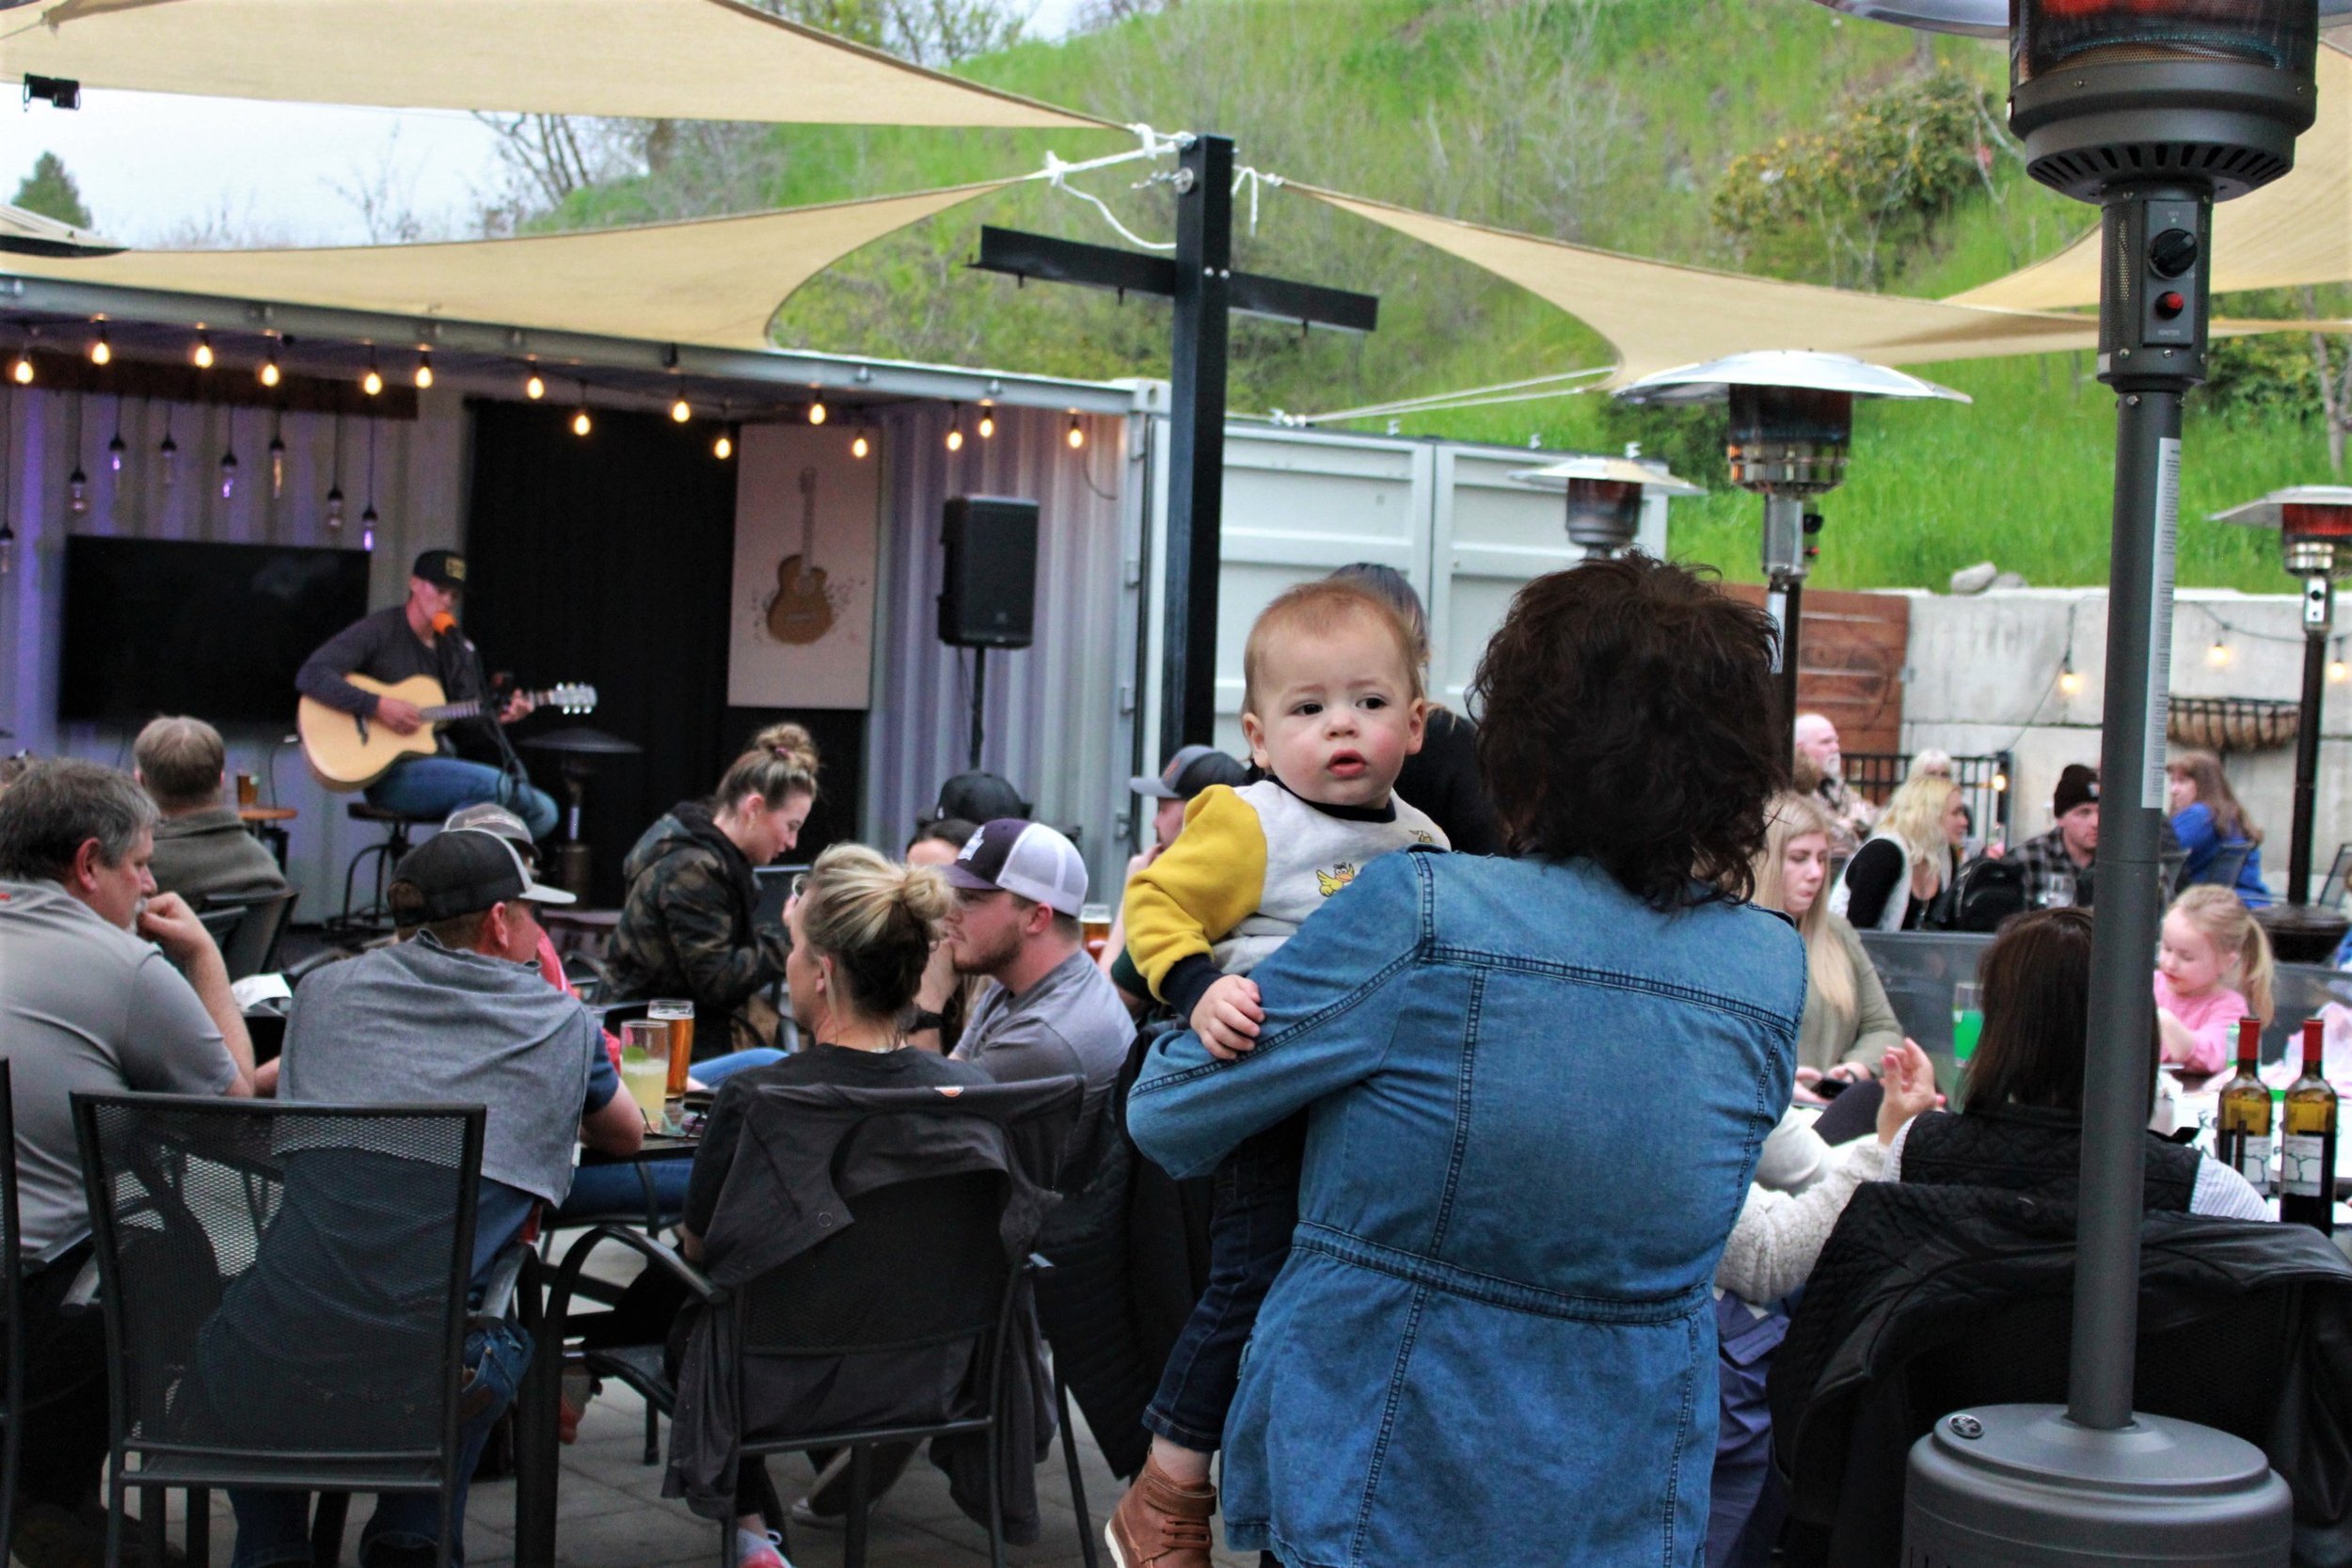 Groundwork Brewery is known for its family-friendly atmosphere.